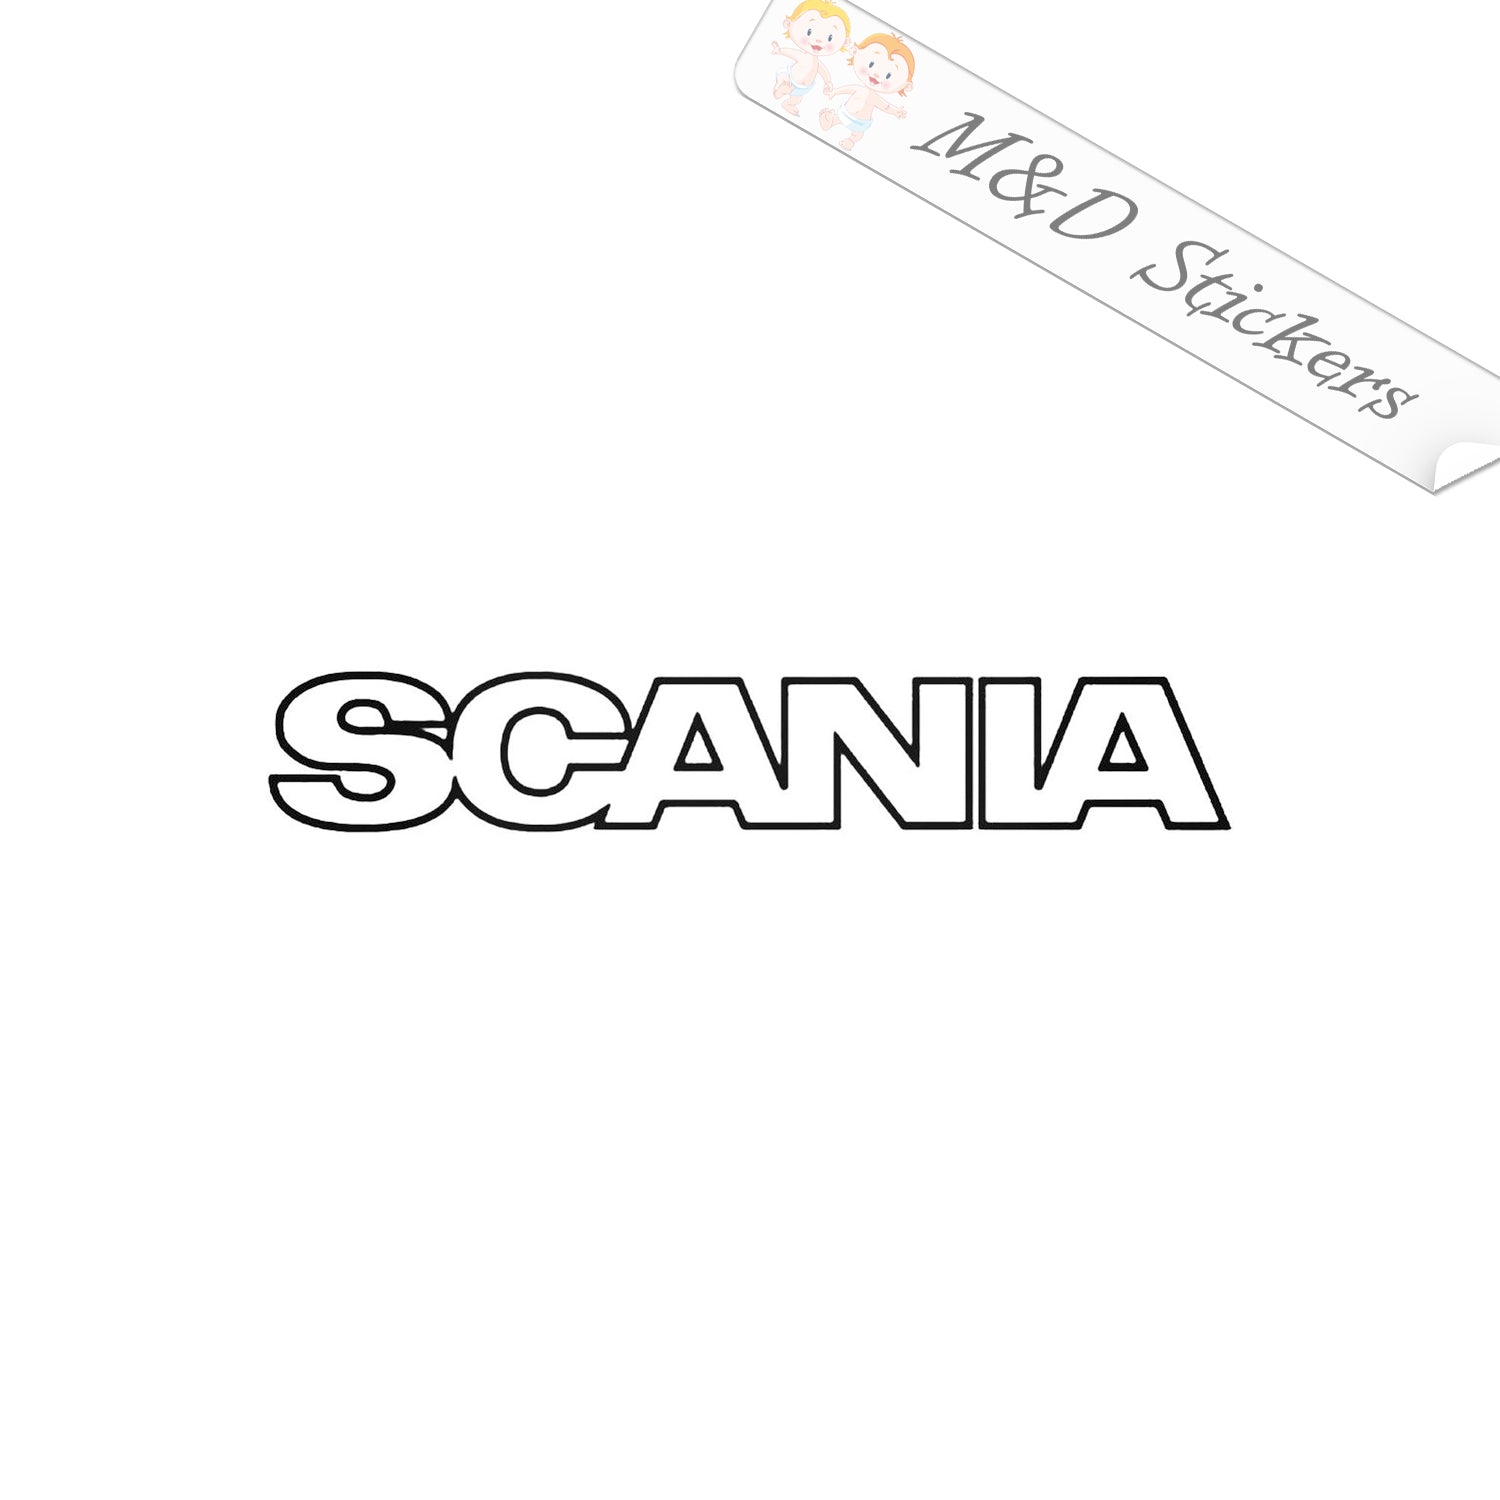 SCANIA TRUCK LOGO STICKER DECAL for Cab X2 1200mm Hi, Choice of colours